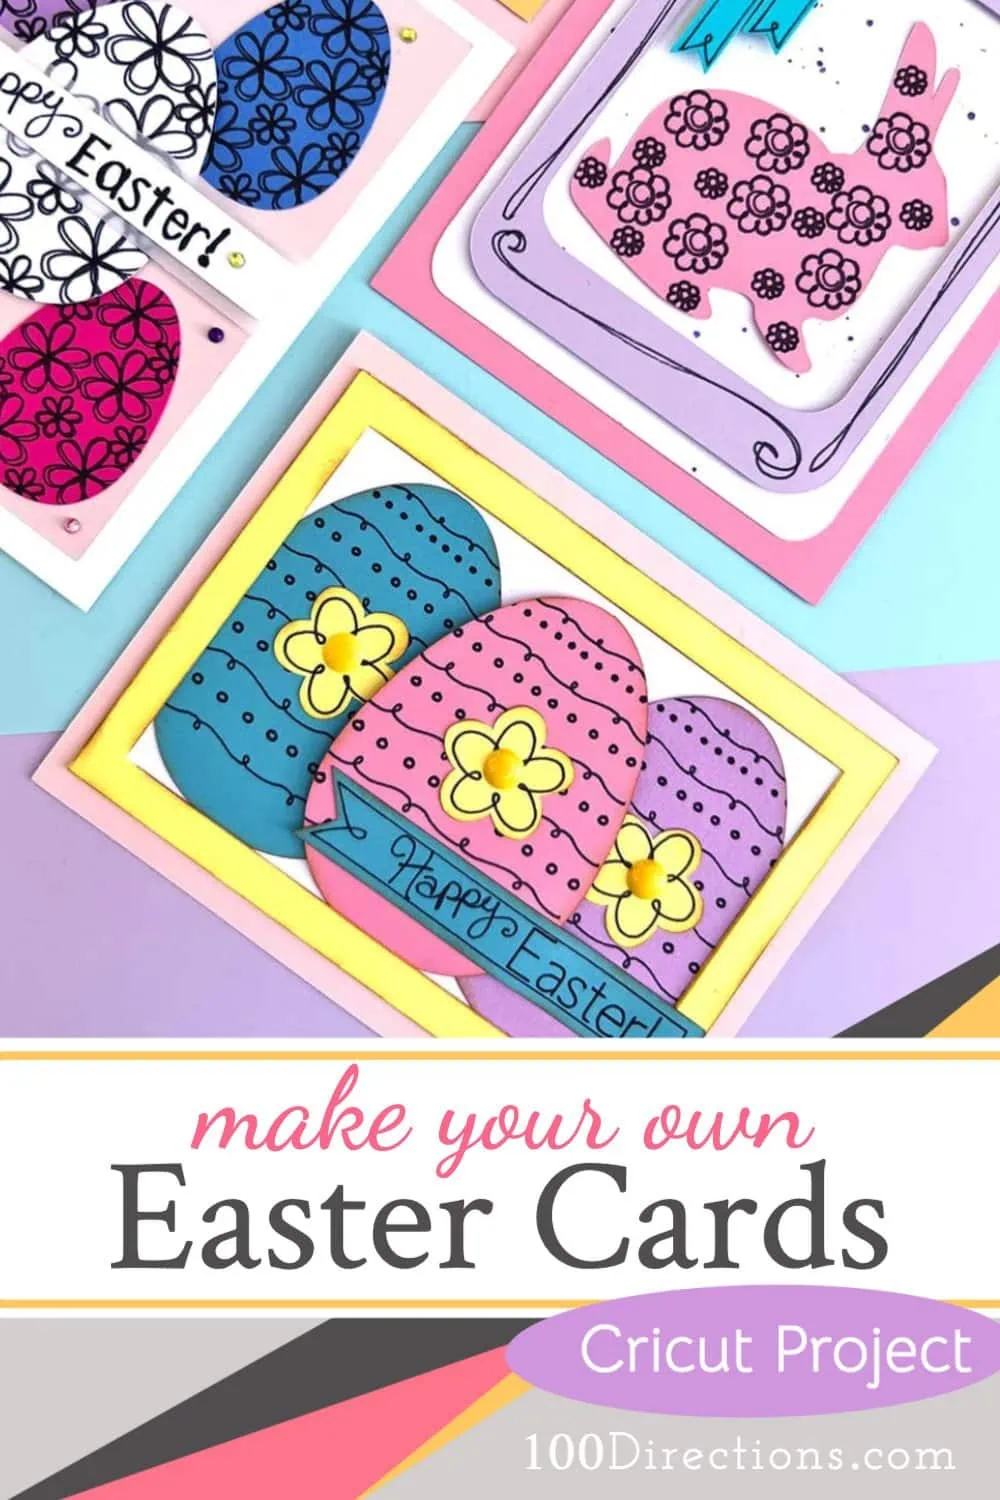 Make Easter Cards with your Cricut - cute crafts you can create yourself